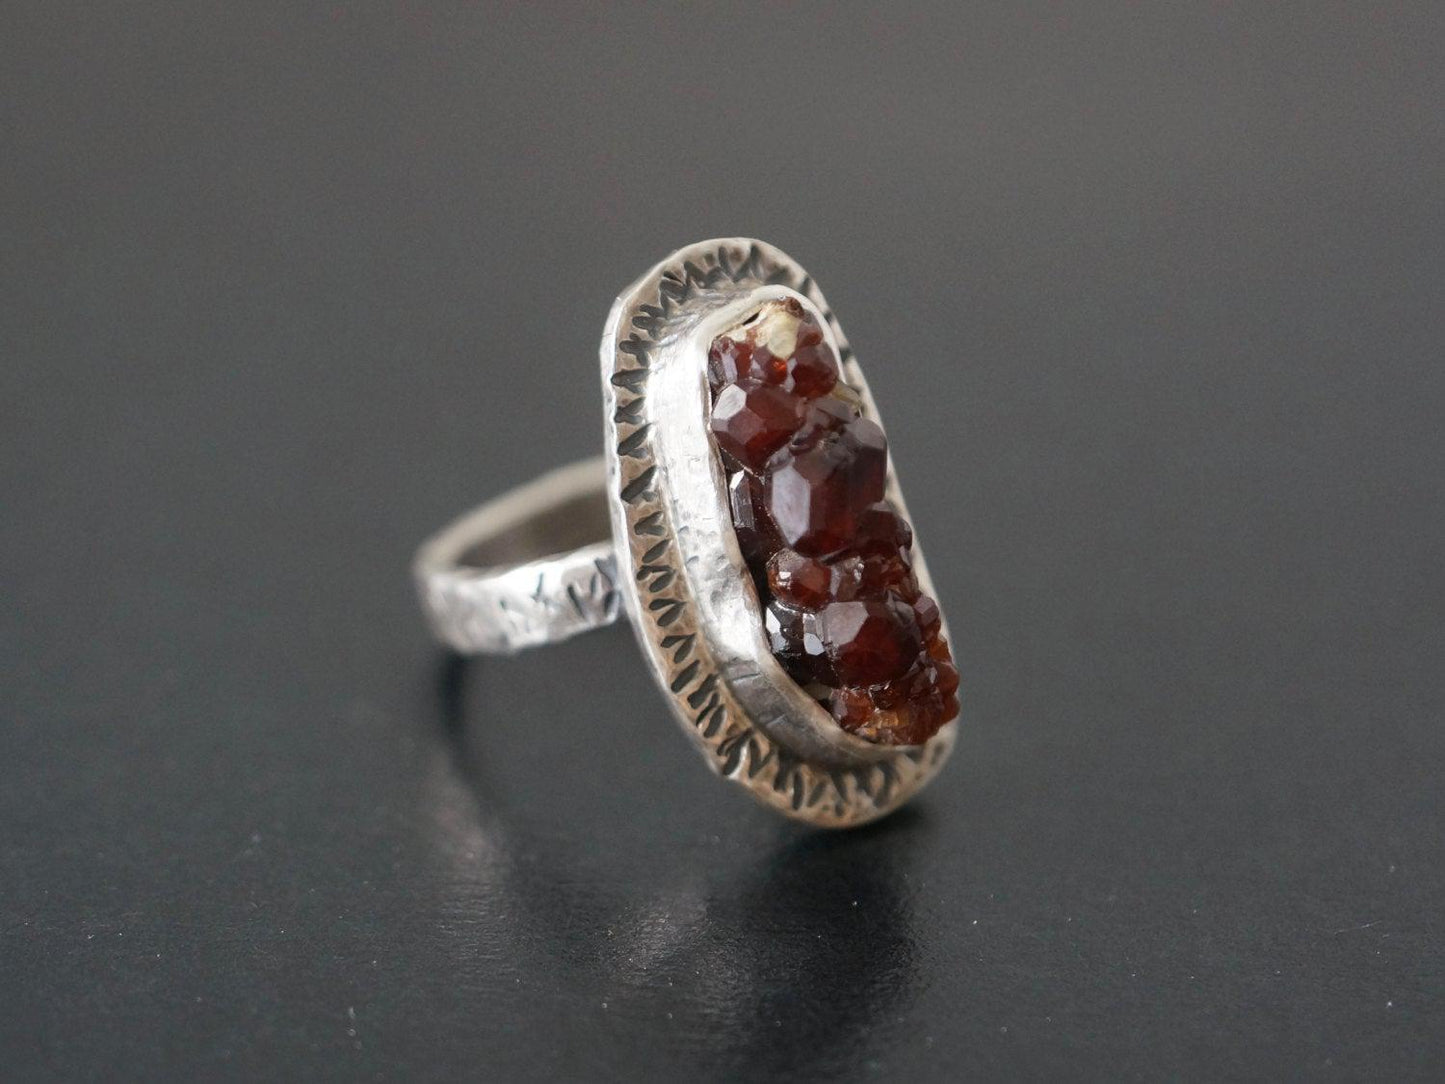 Rough garnet and sterling silver ring, size 7.25